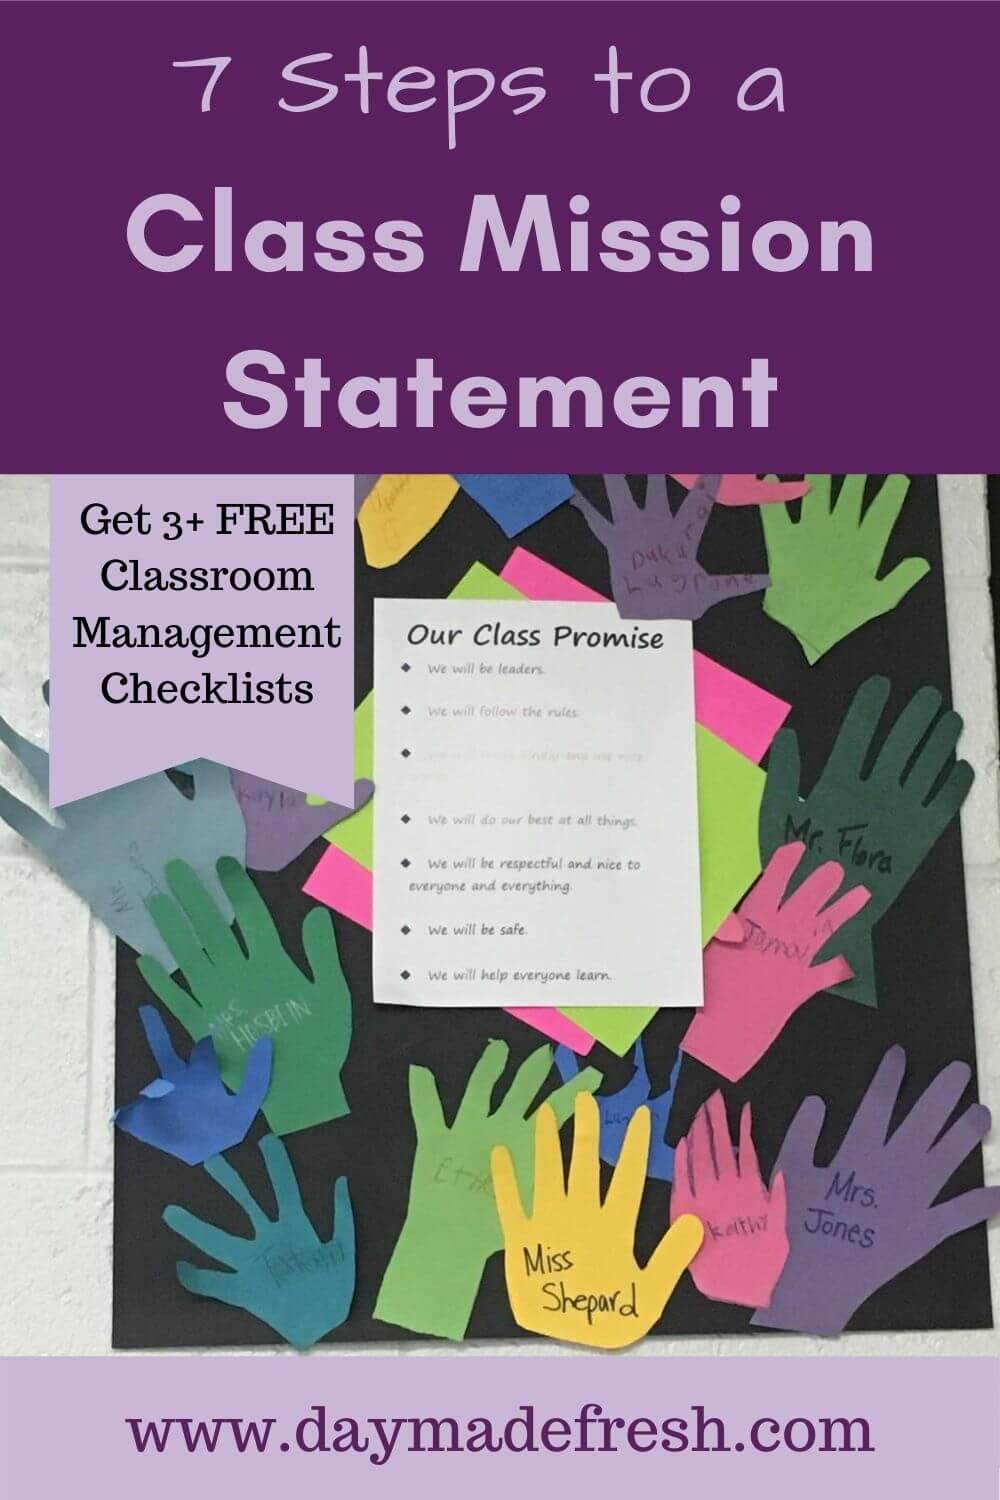 mission statements in education